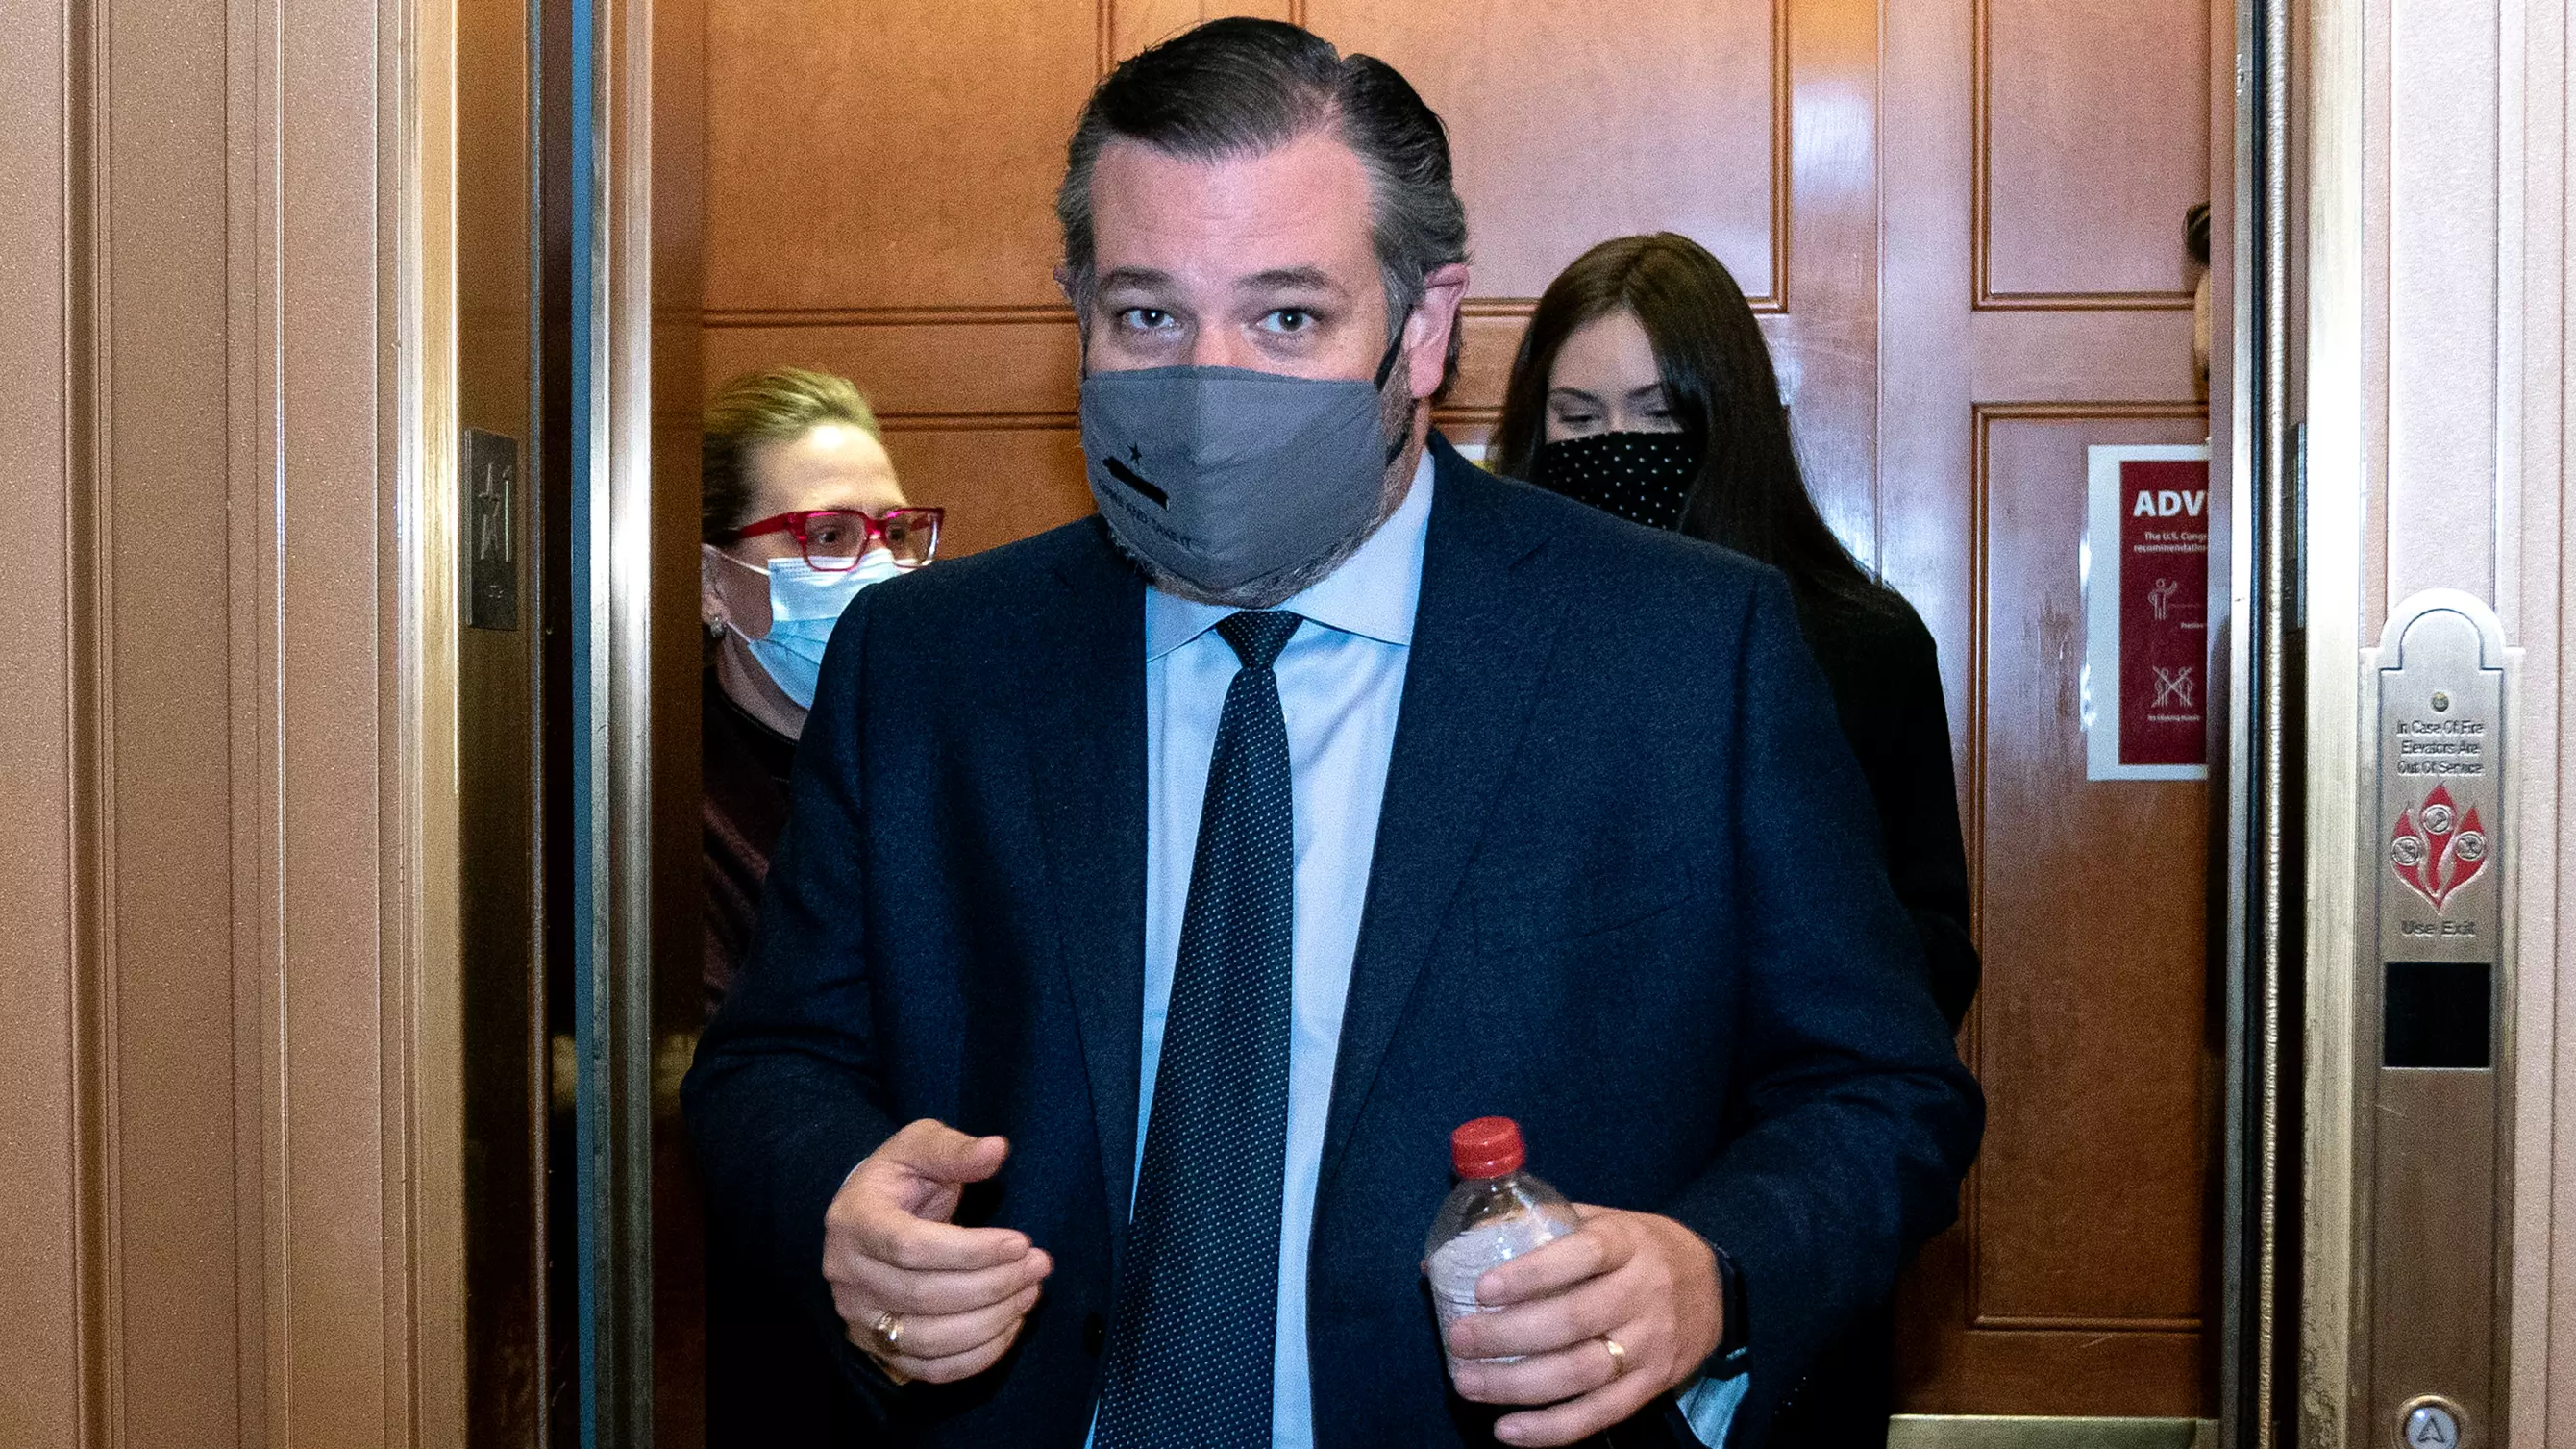 Ted Cruz Slammed For Flying To Mexico While His Beloved Texas Freezes